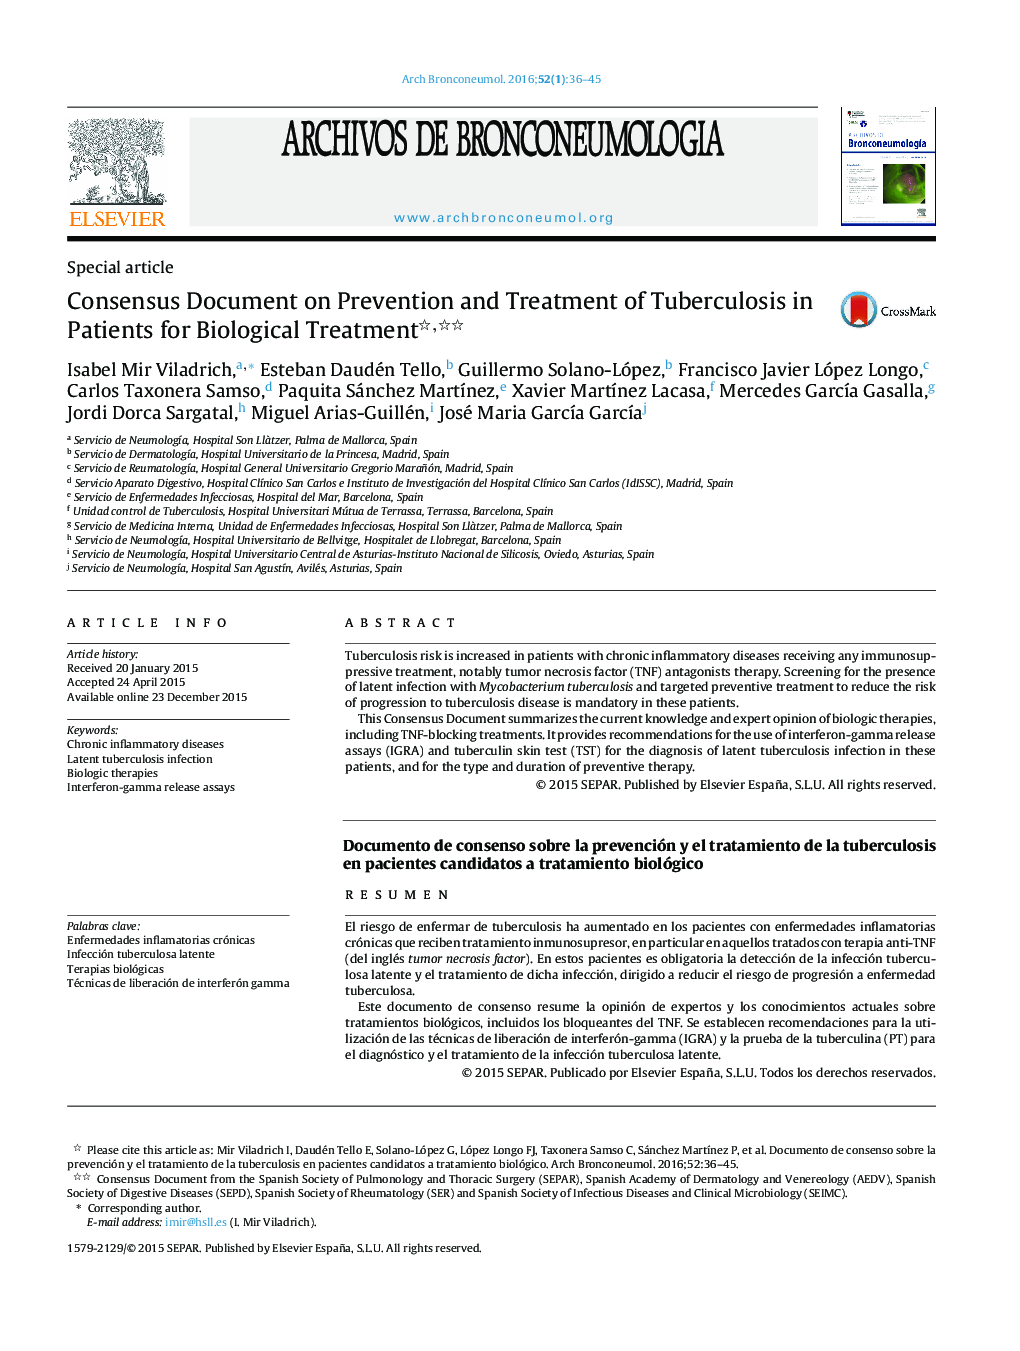 Consensus Document on Prevention and Treatment of Tuberculosis in Patients for Biological Treatment 